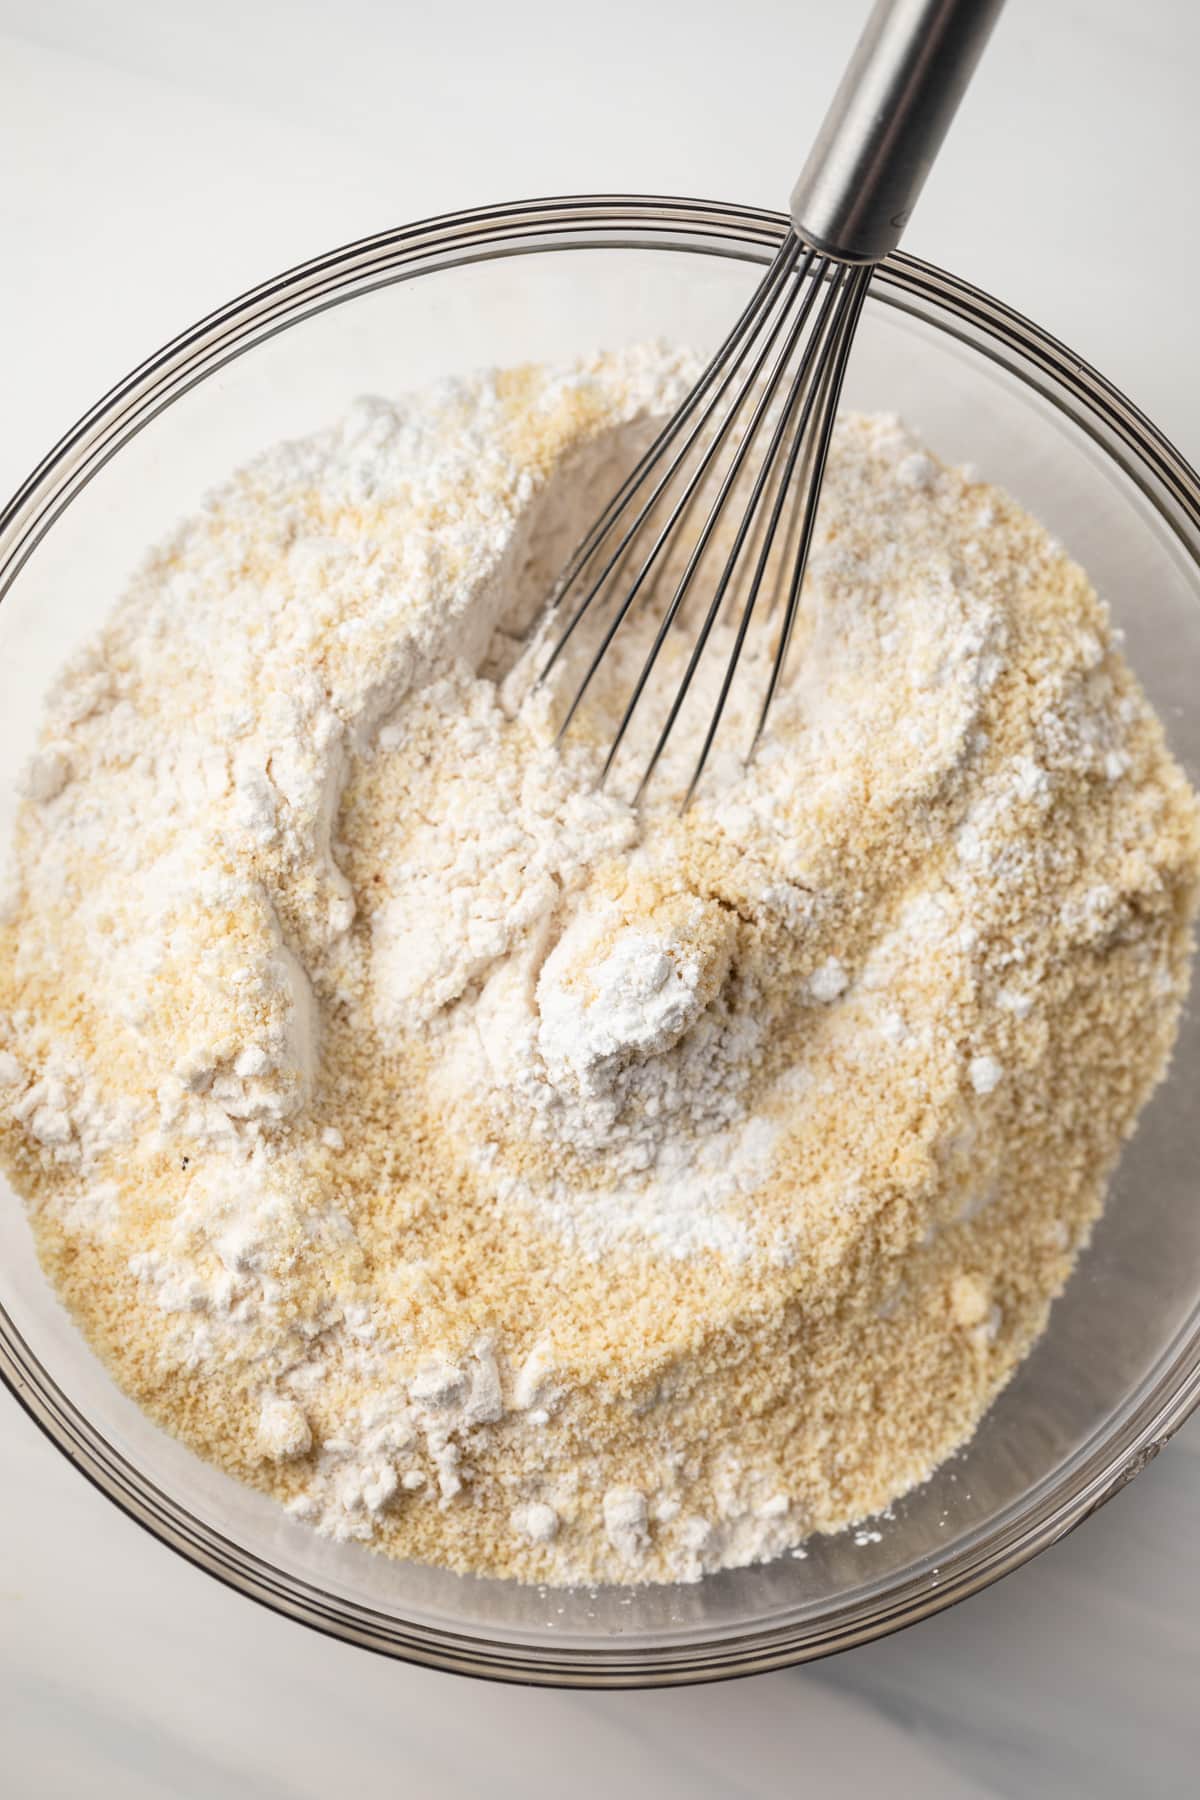 Flour and almond flour in bowl with whisk.